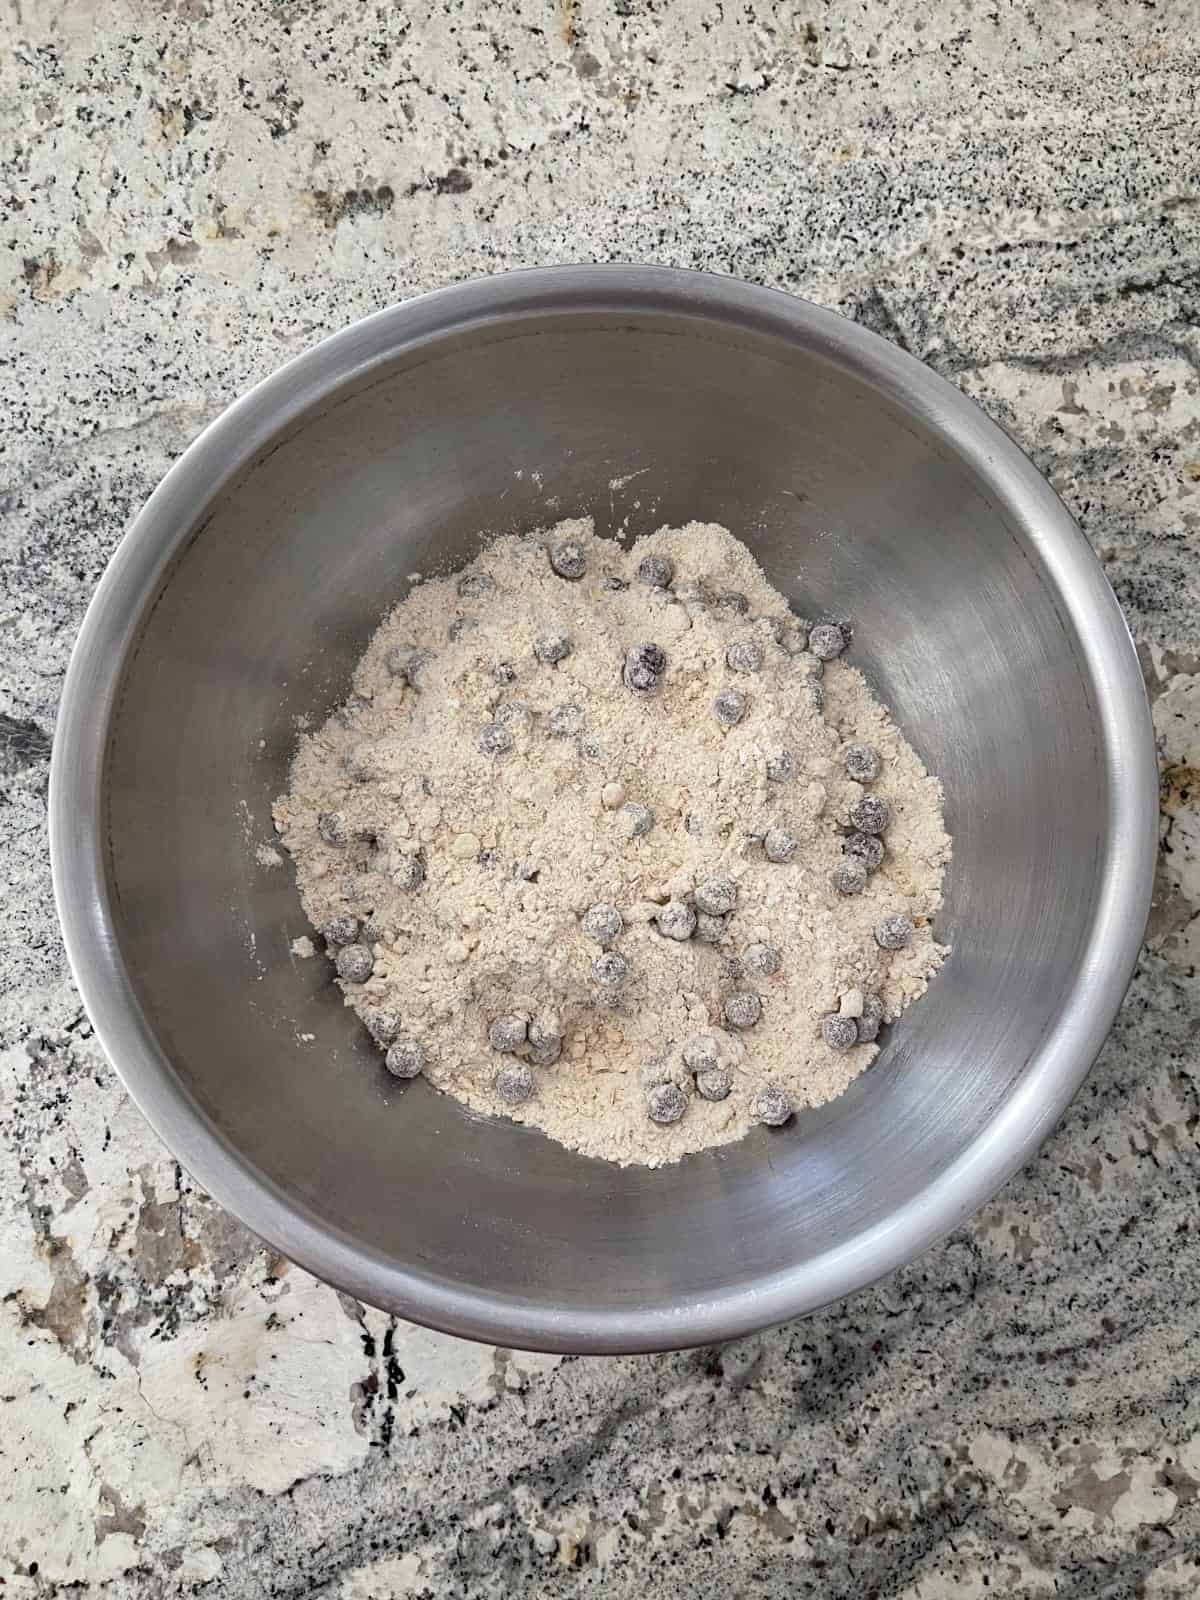 Tossing blueberries in mixture of baking mix, oats, sweetener and baking soda.